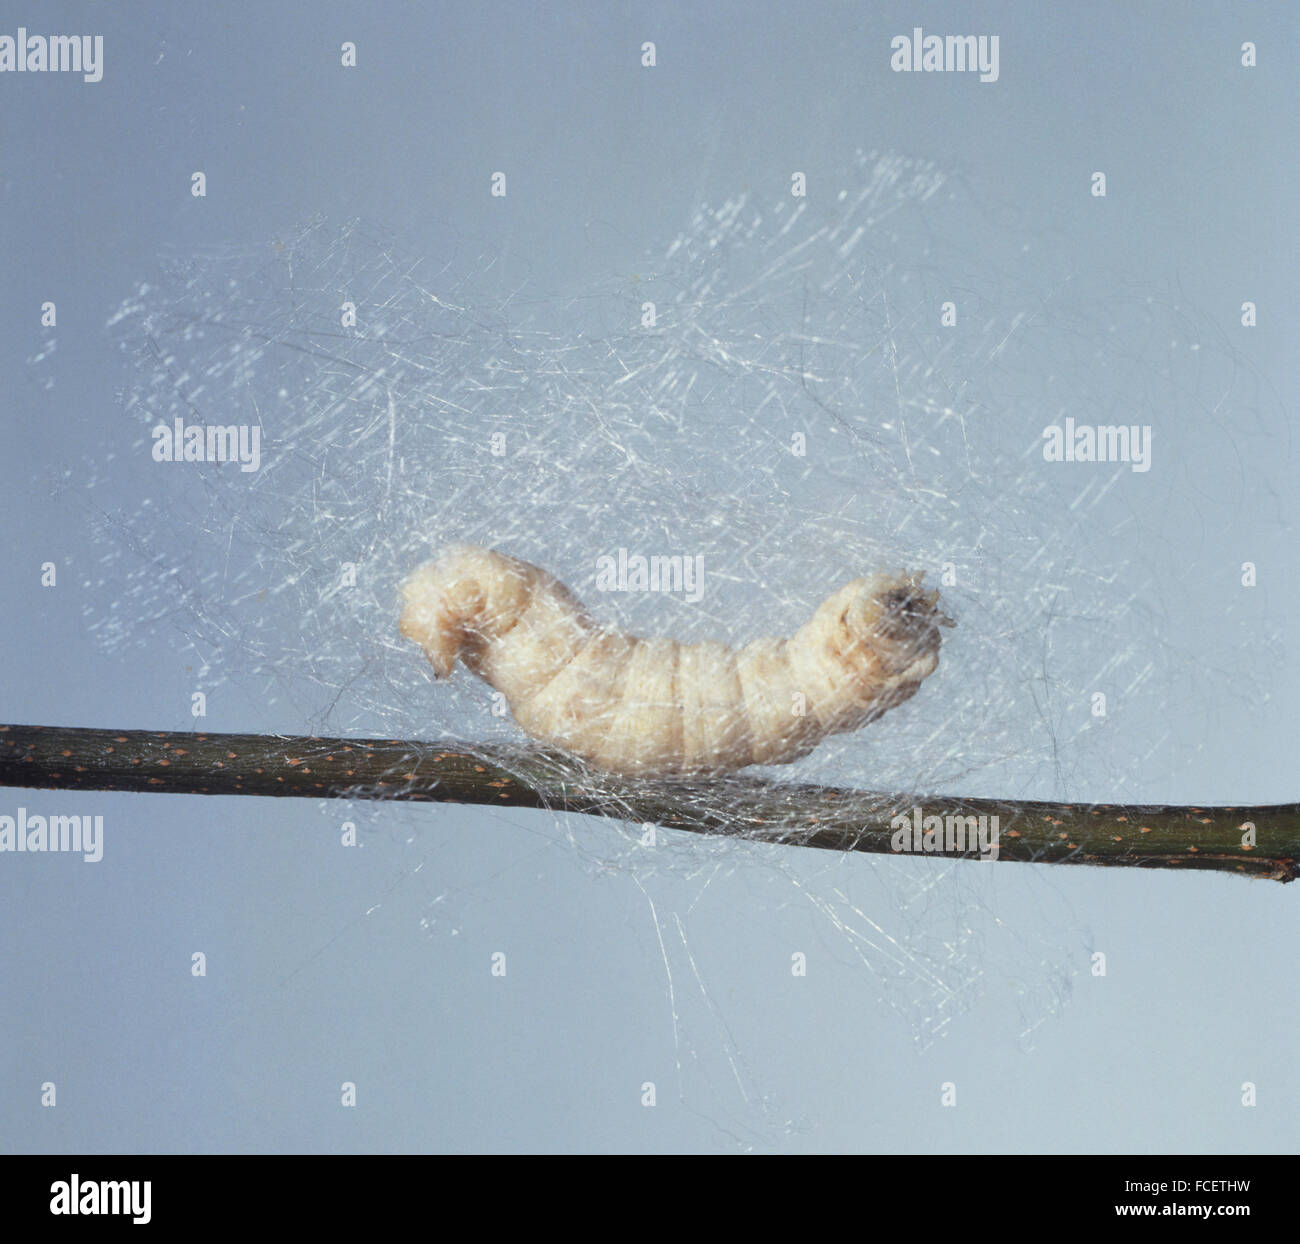 Bombyx mori (Silkworm), a silk worm spinning its cocoon Stock Photo